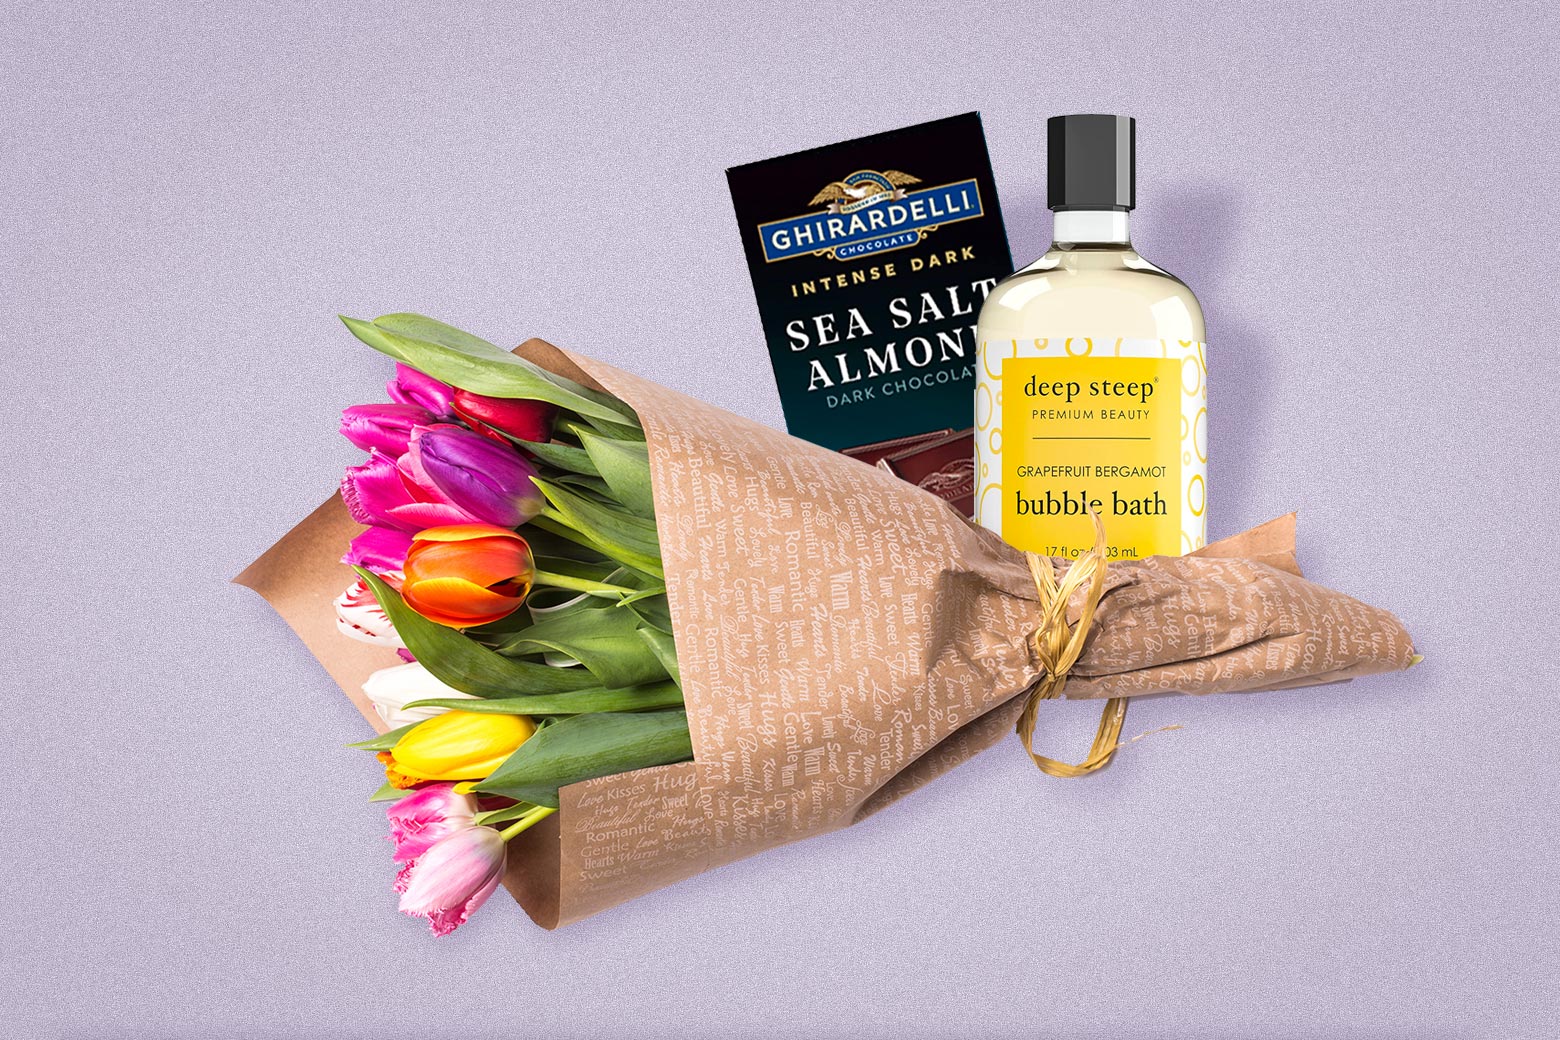 Luxury items, including a bouquet of tulips, Ghirardelli sea salt–almond dark chocolate, and grapefruit-scented bubble bath, against a purple background.